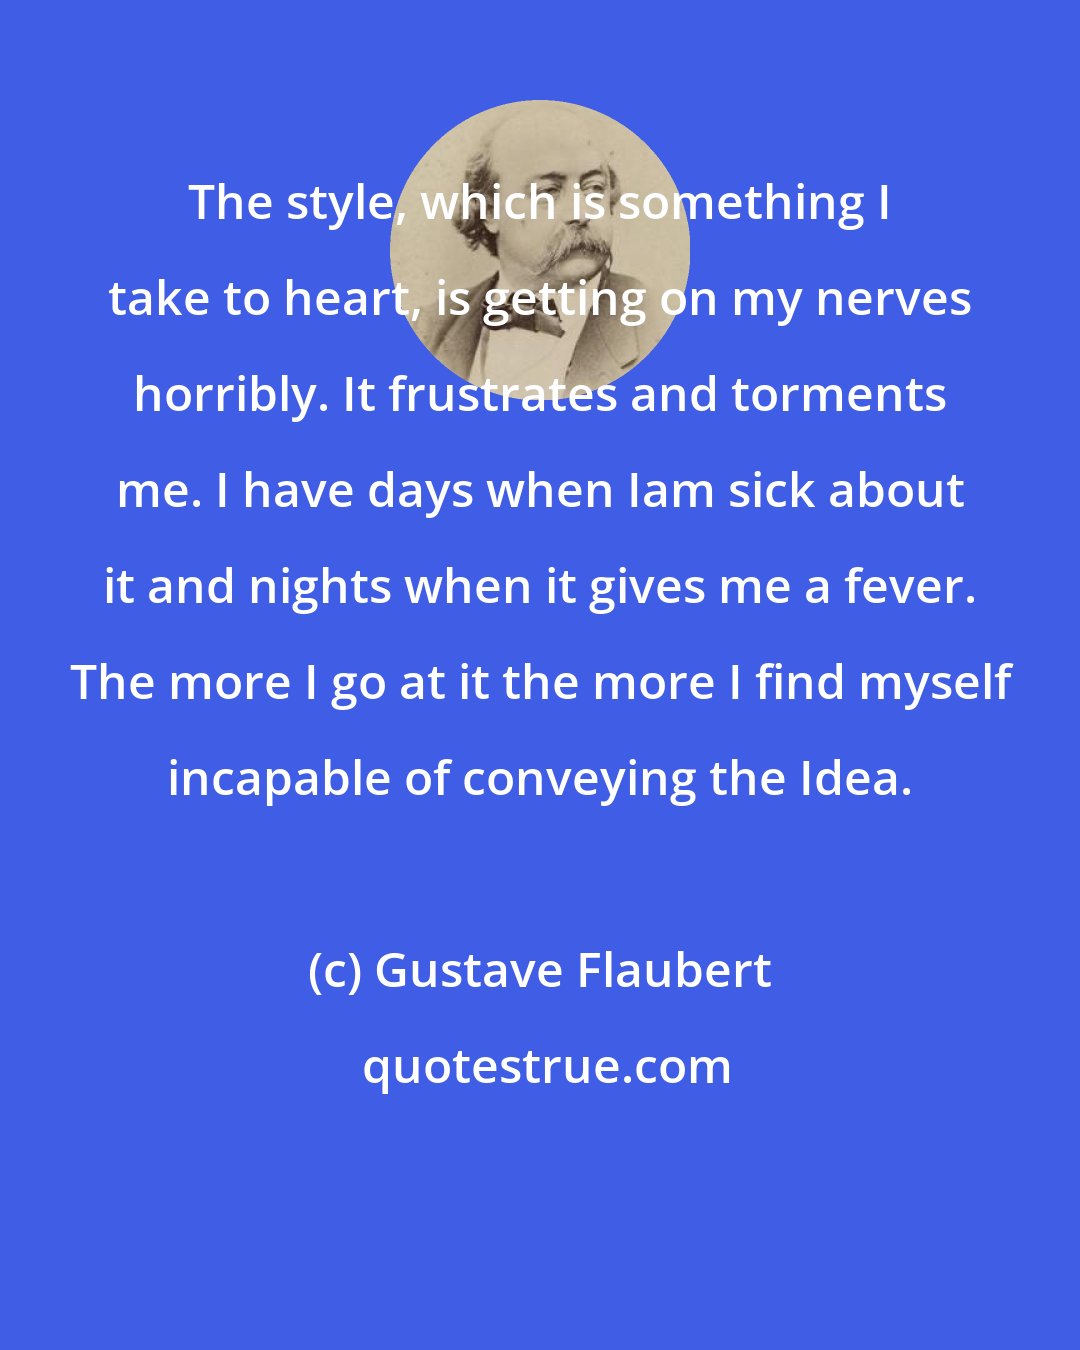 Gustave Flaubert: The style, which is something I take to heart, is getting on my nerves horribly. It frustrates and torments me. I have days when Iam sick about it and nights when it gives me a fever. The more I go at it the more I find myself incapable of conveying the Idea.